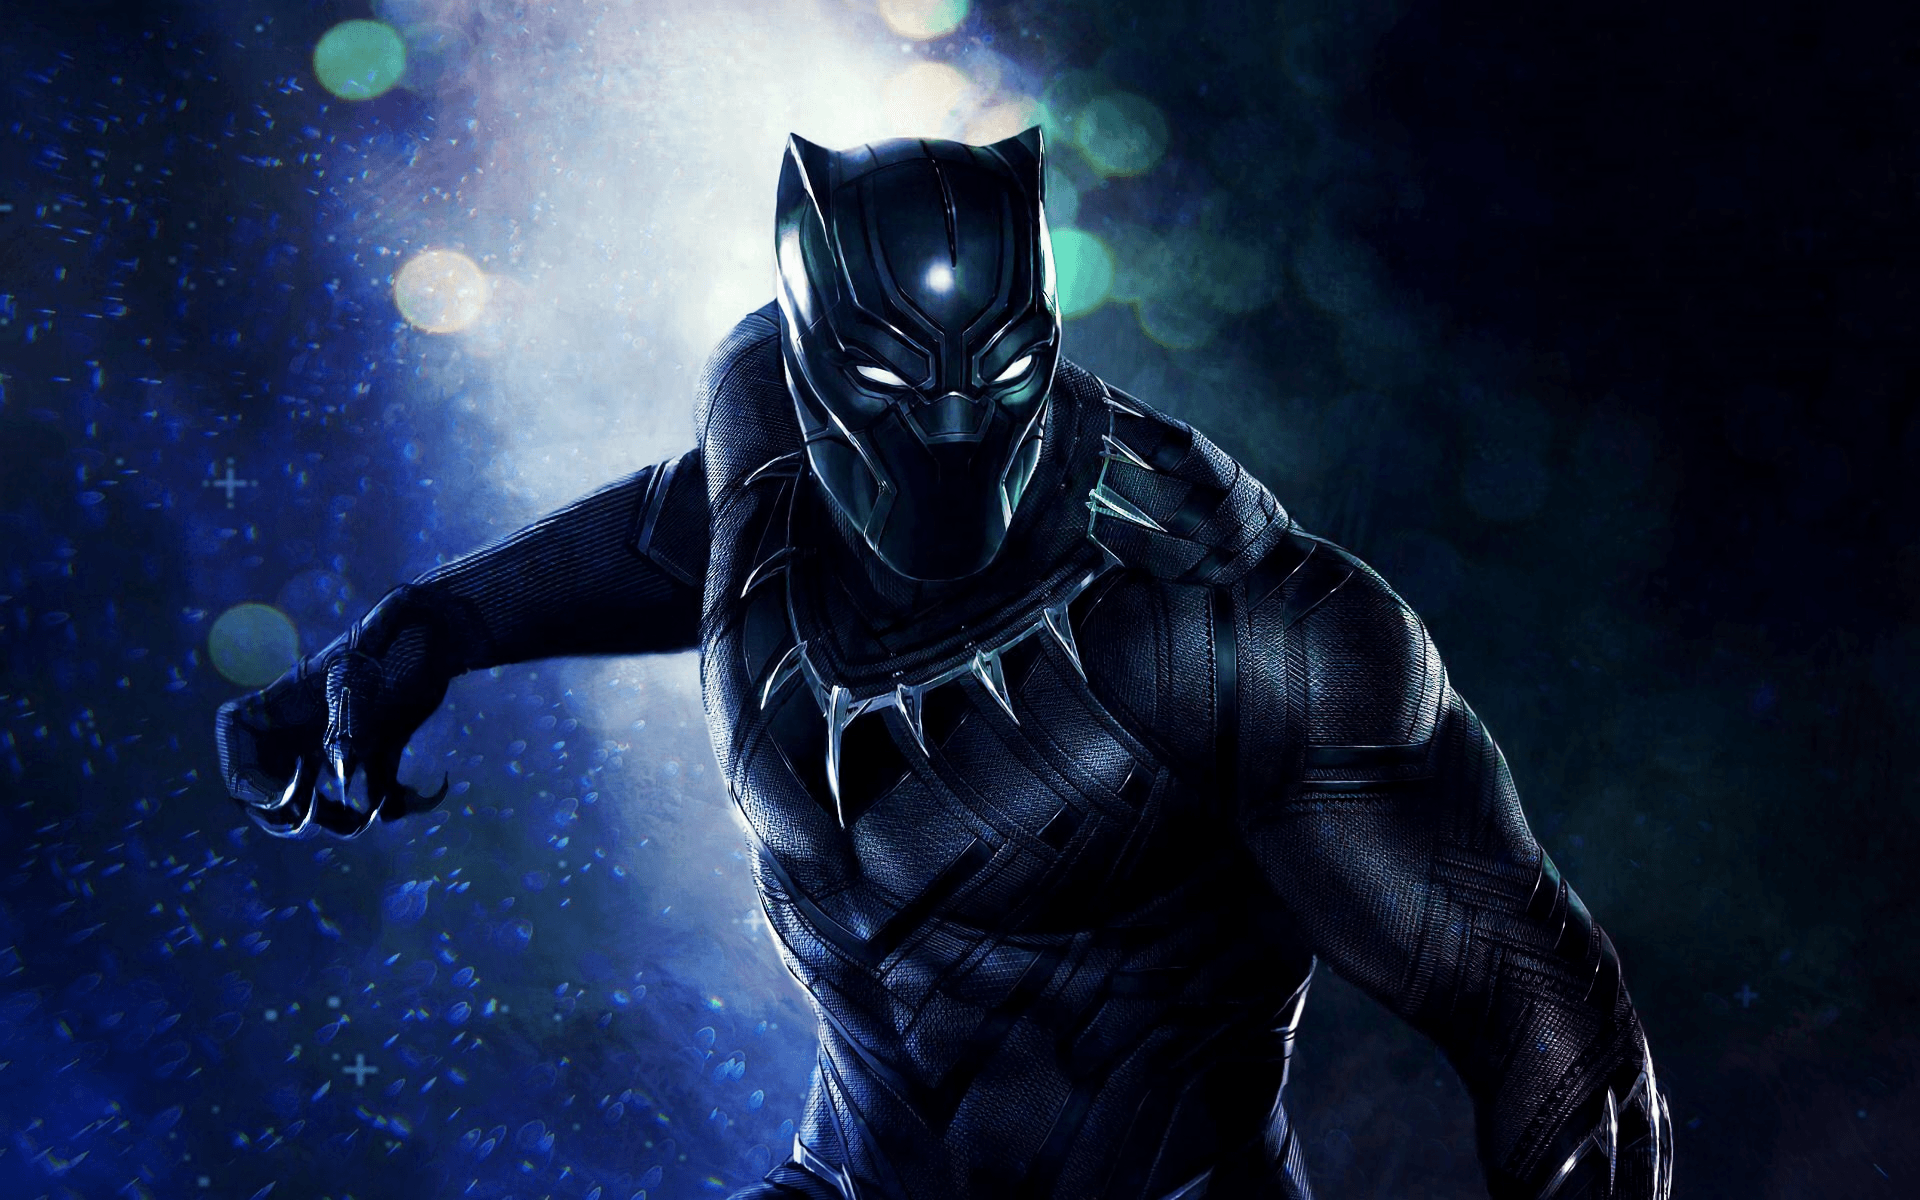 Does the Black Panther have a son?